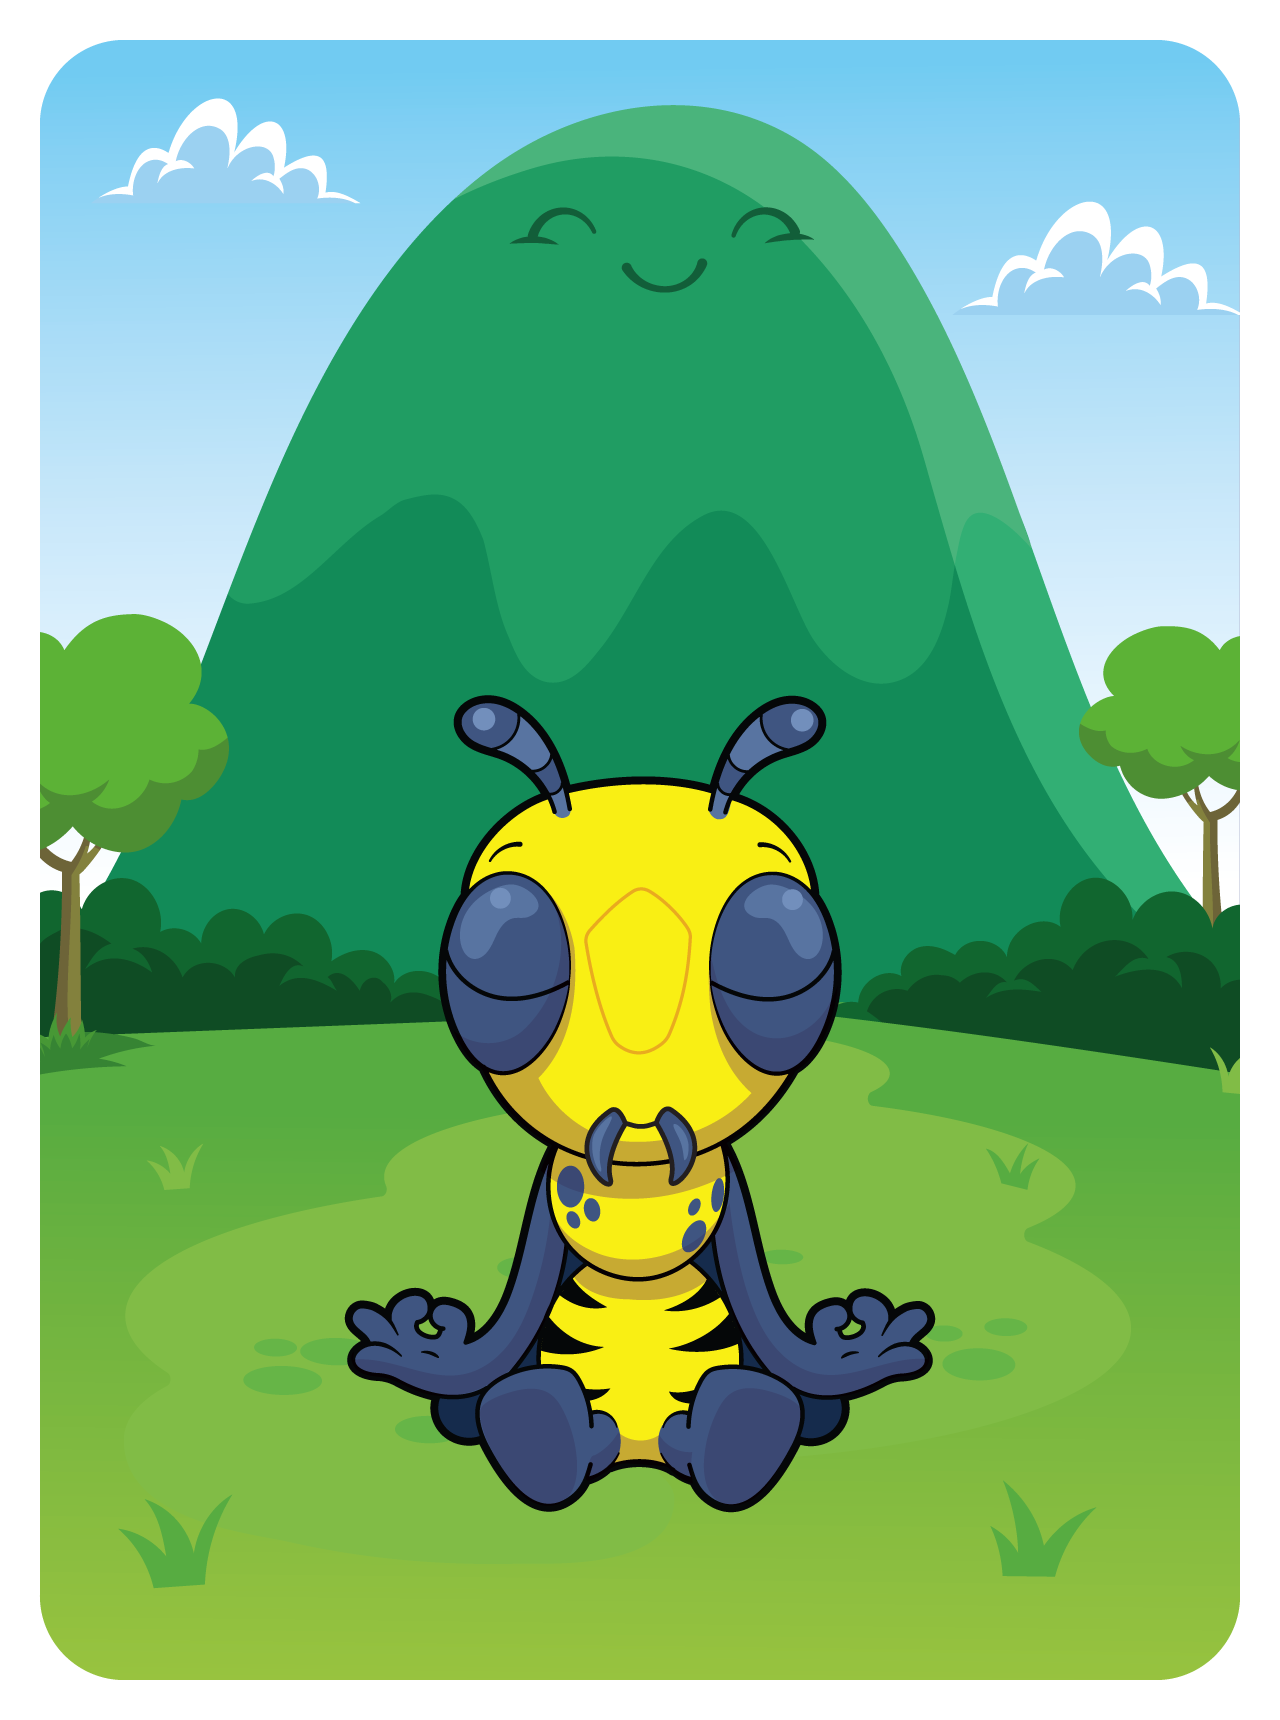 Wise Wasp #17544